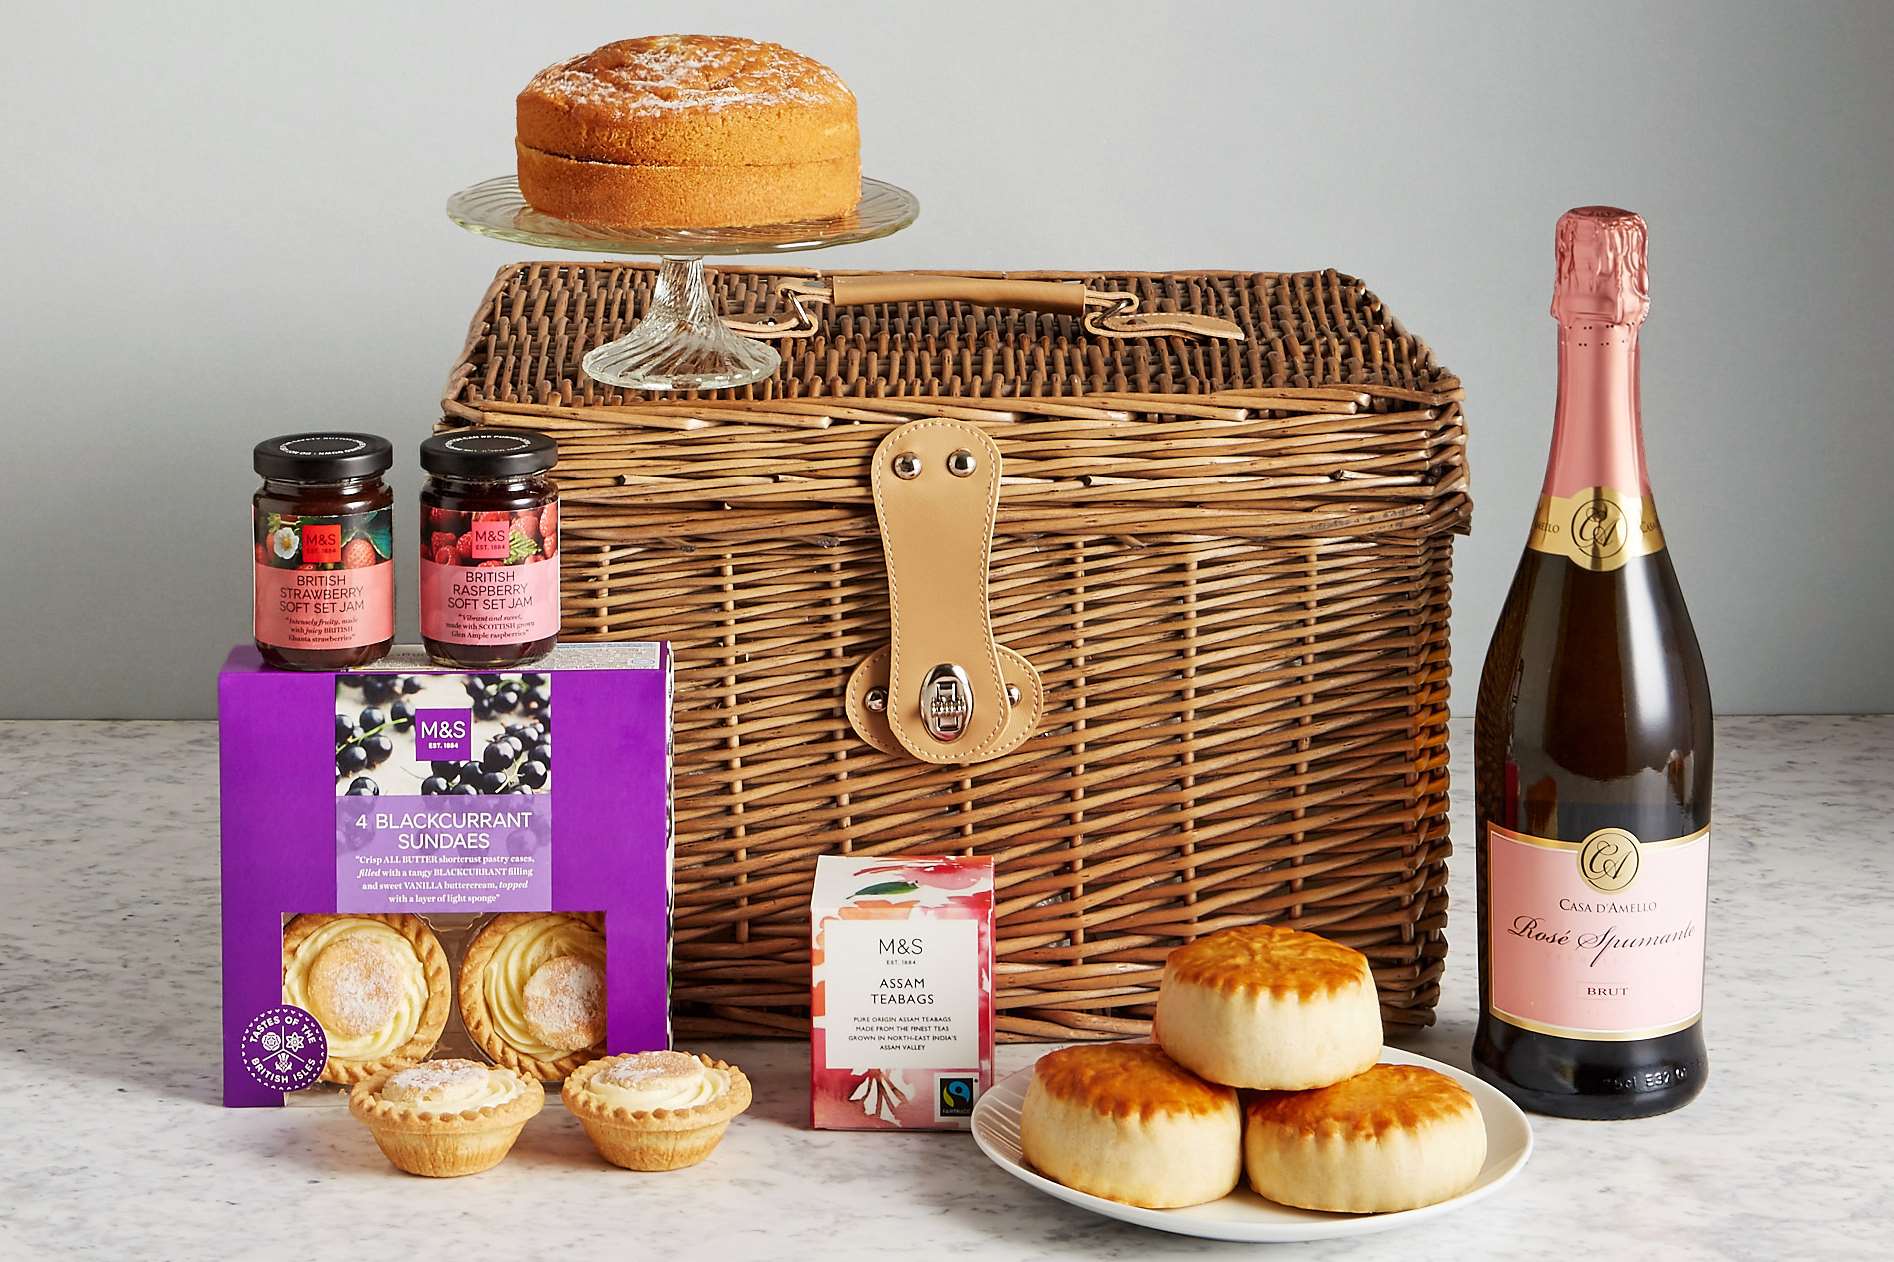 Mother's Day hamper from M&S